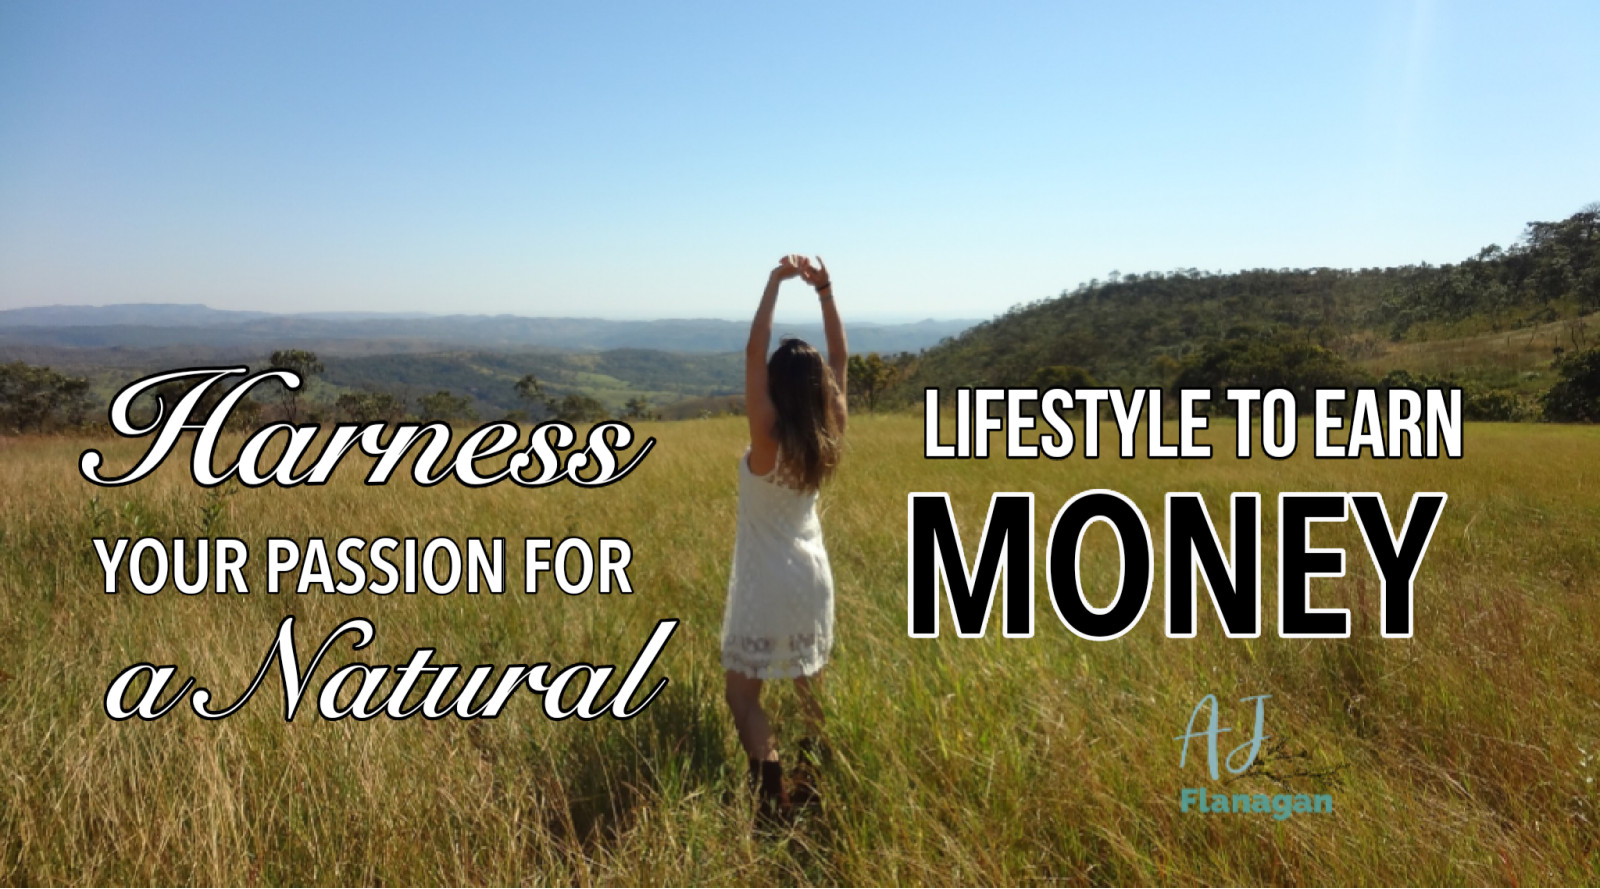 Harness Your Passion for a Natural Lifestyle to Earn Money